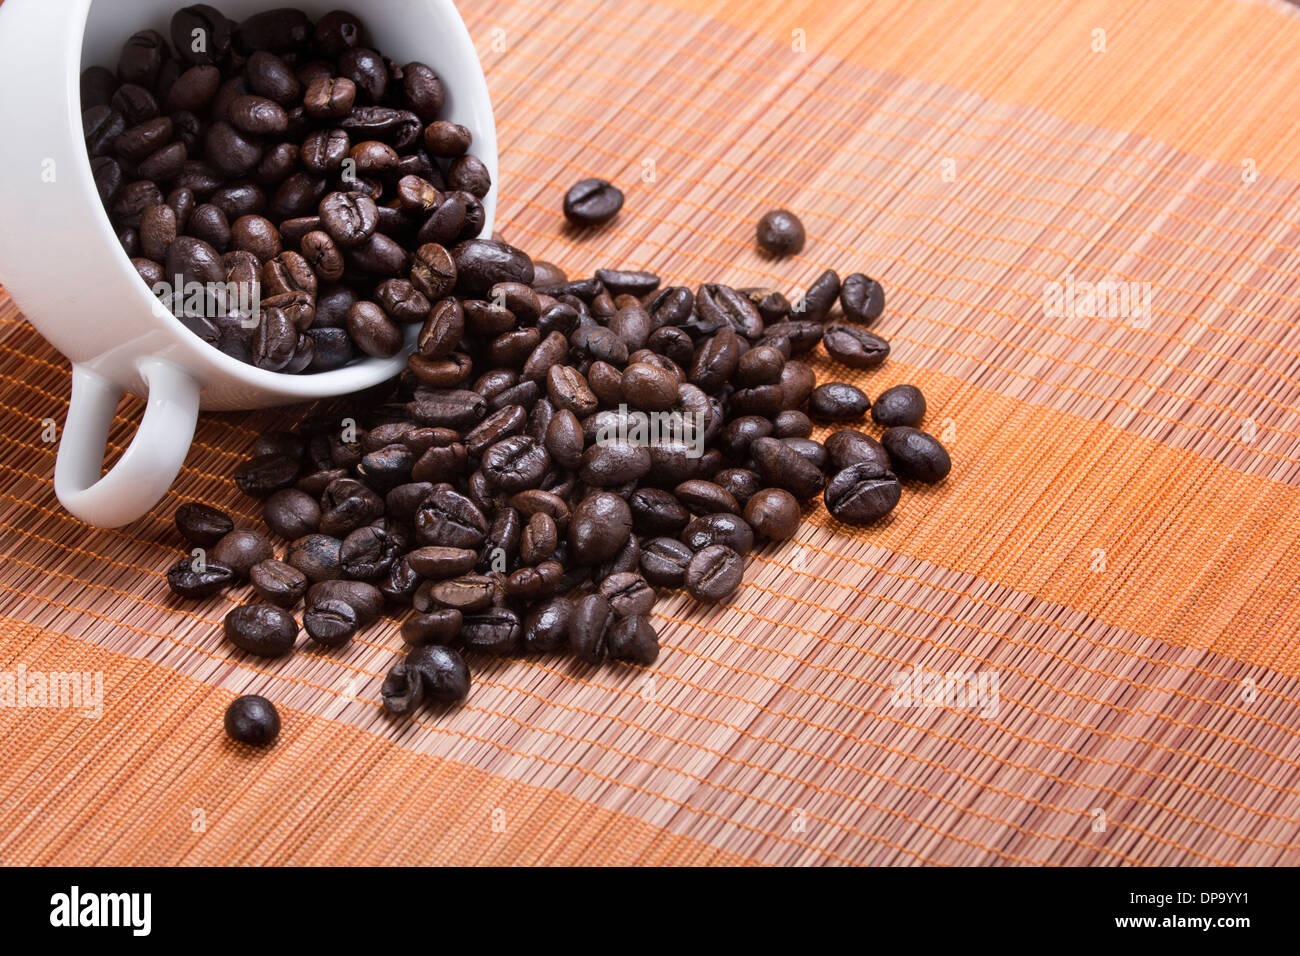 coffee bean cup spill over on wood table pattern Stock Photo